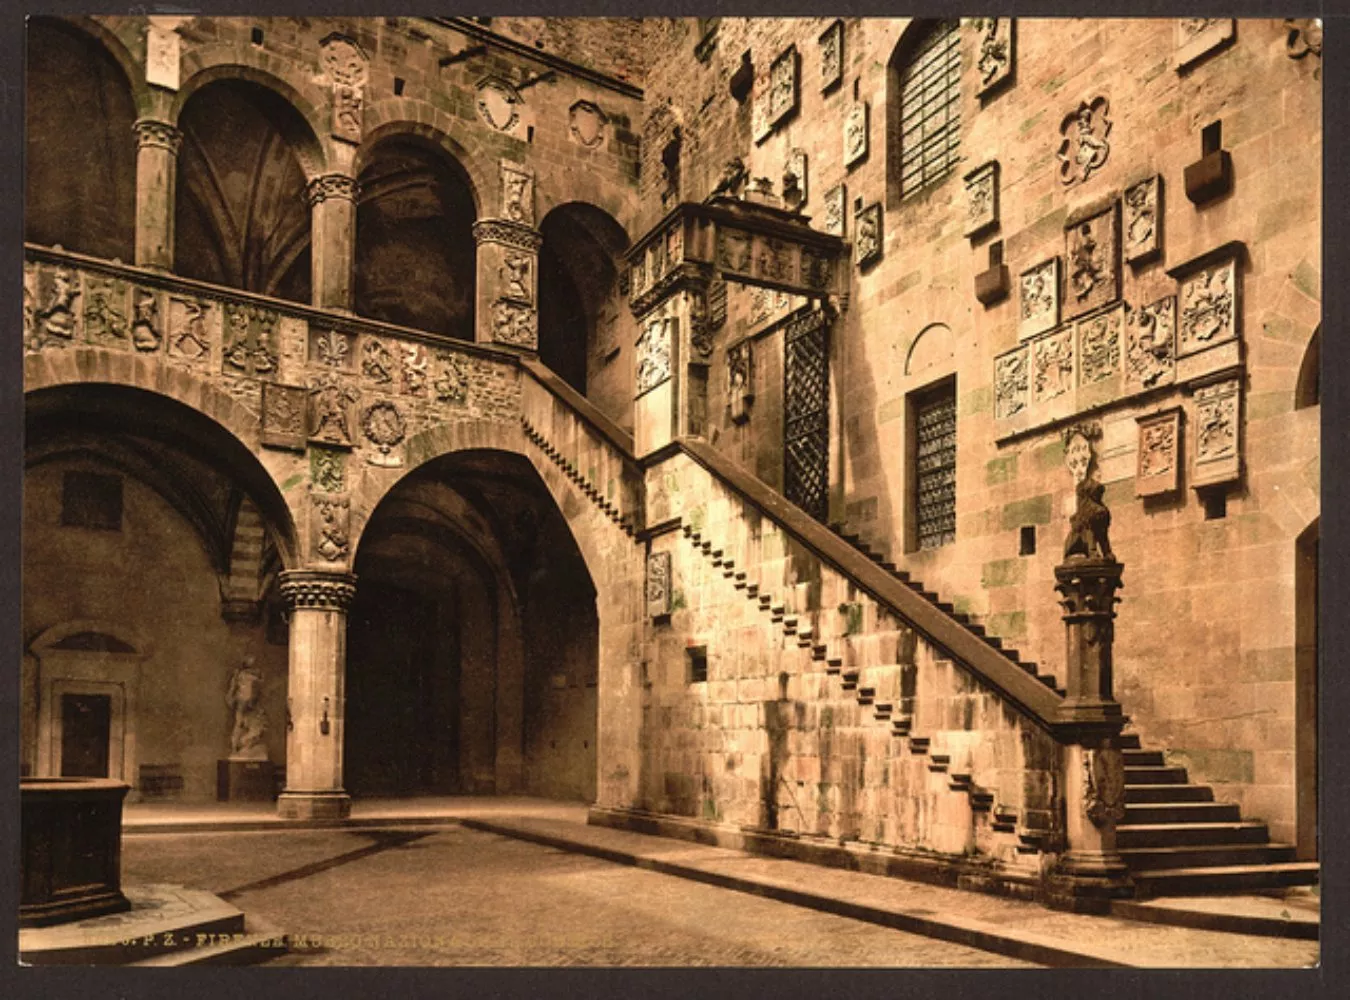 Museum Bargello in Italy, Europe | Museums - Rated 3.8